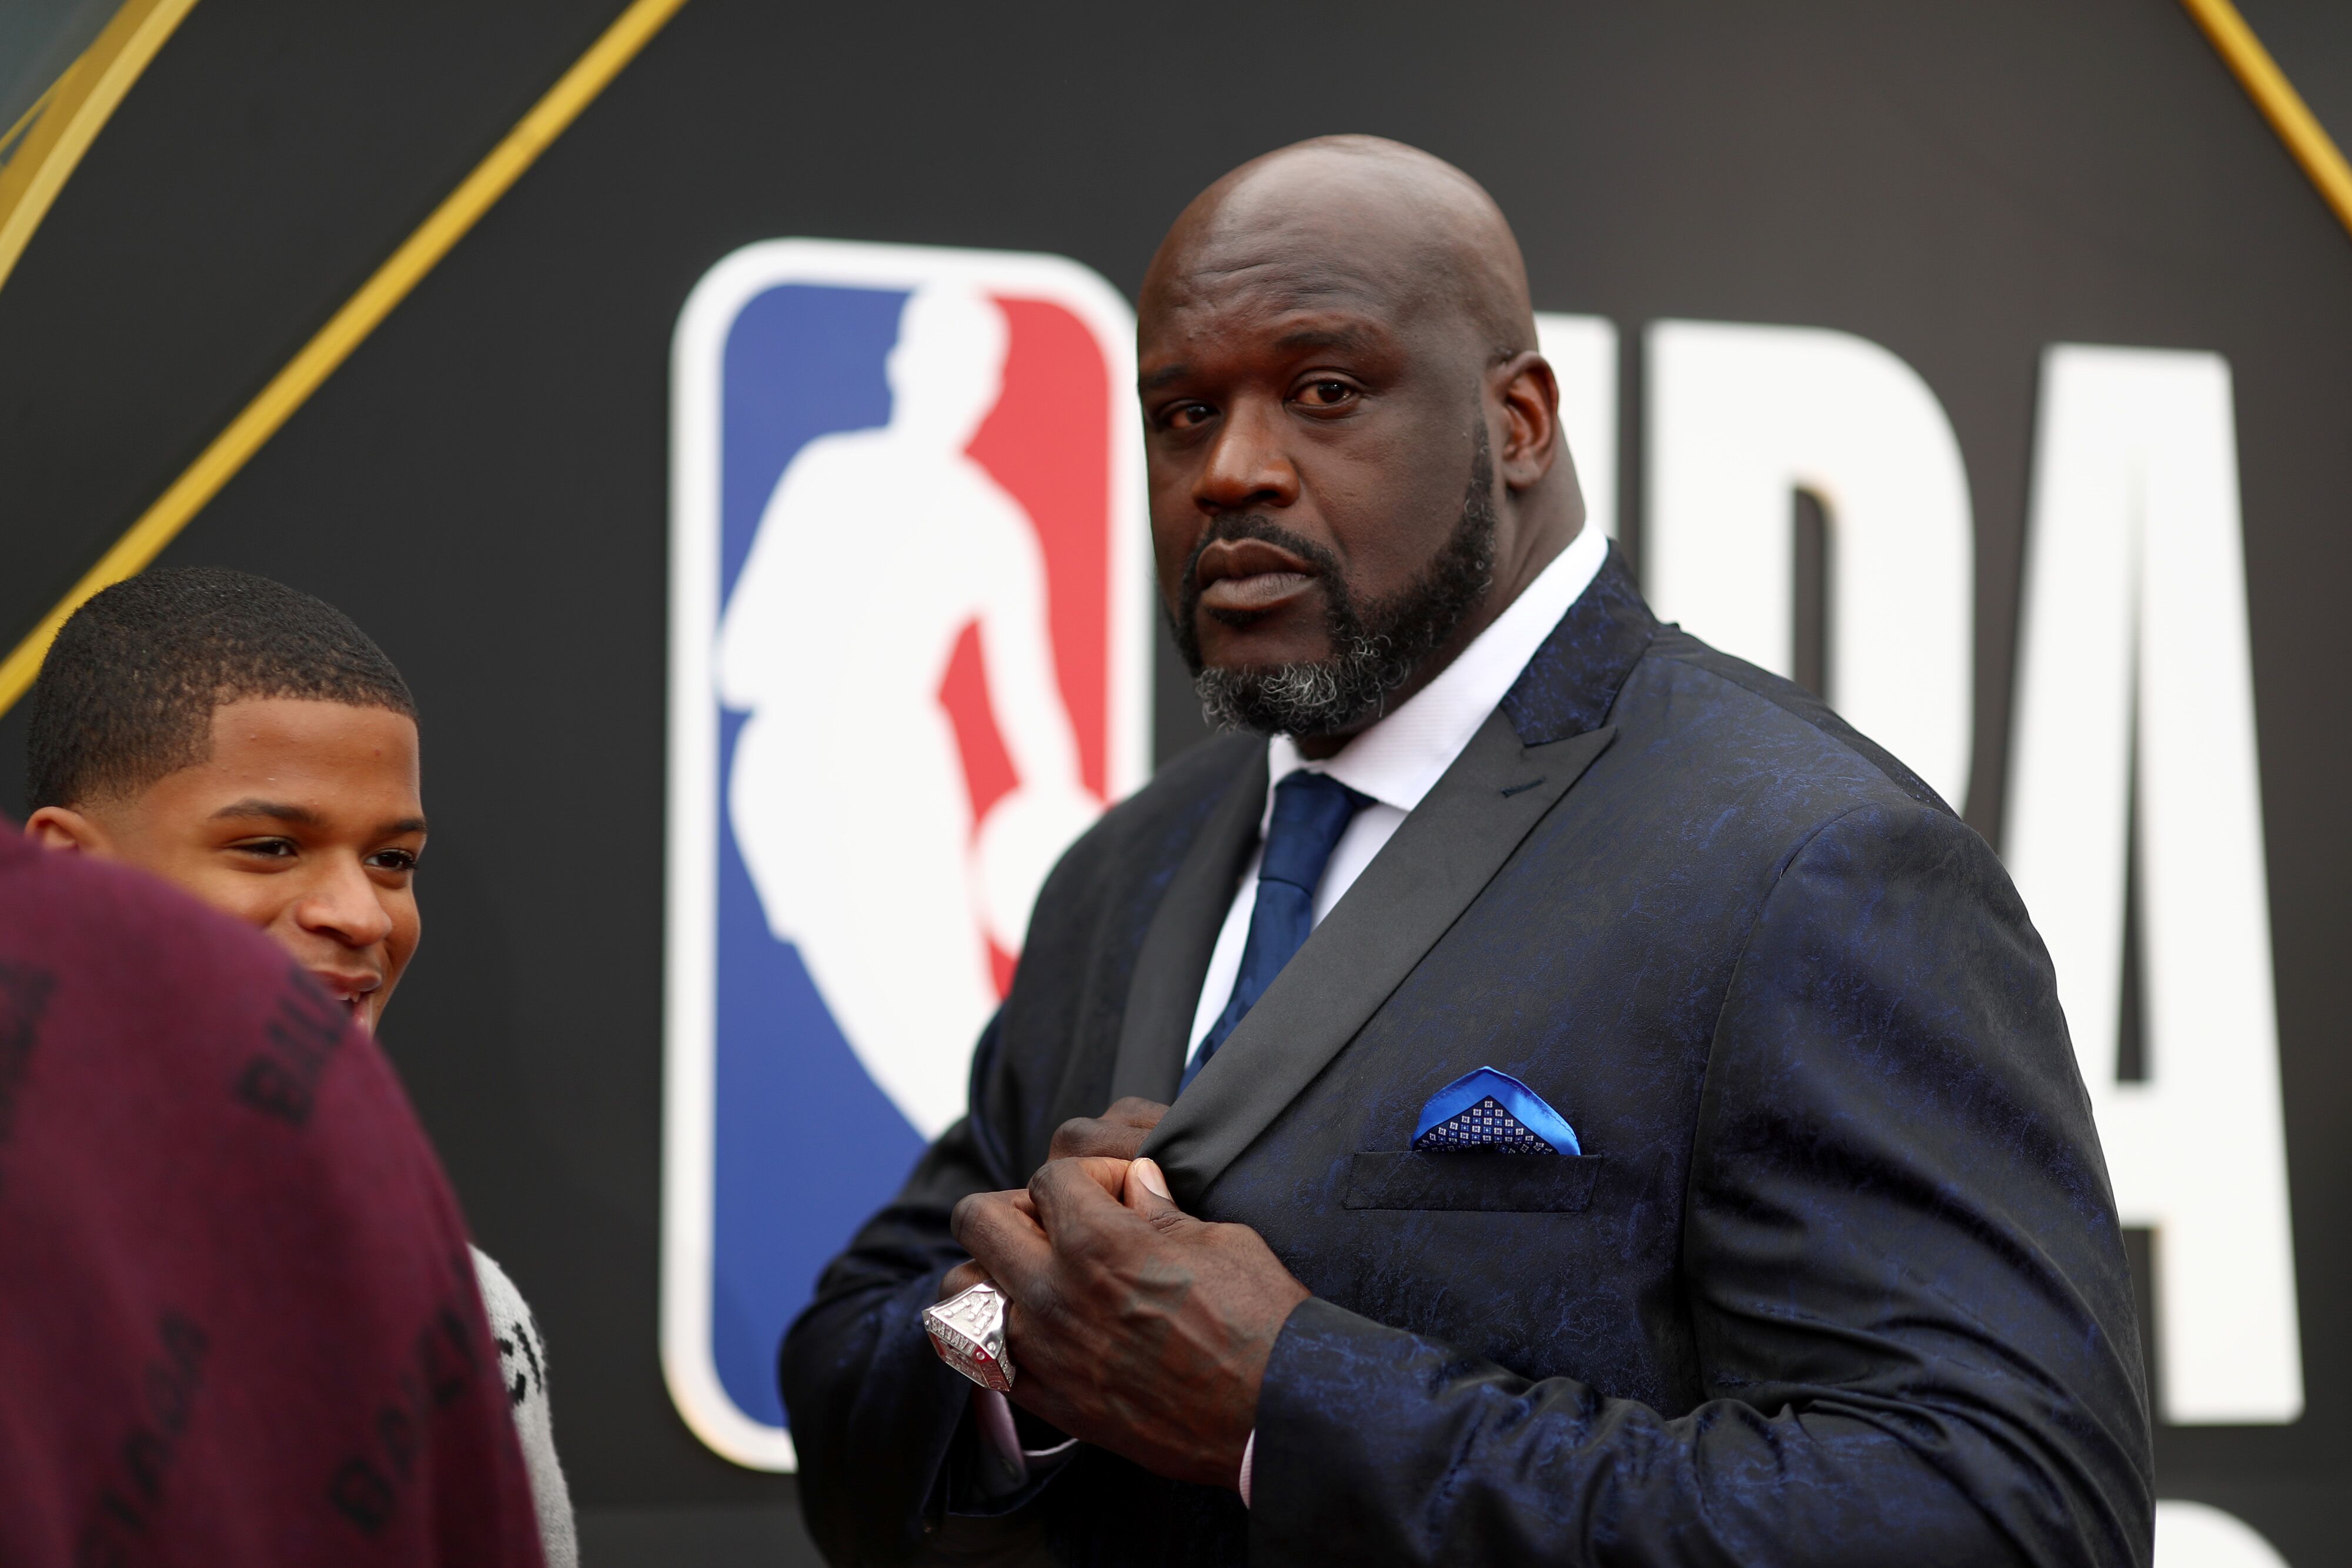 Shaquille O'Neal attends the 2019 NBA Awards presented by Kia on TNT. | Source: Getty Images